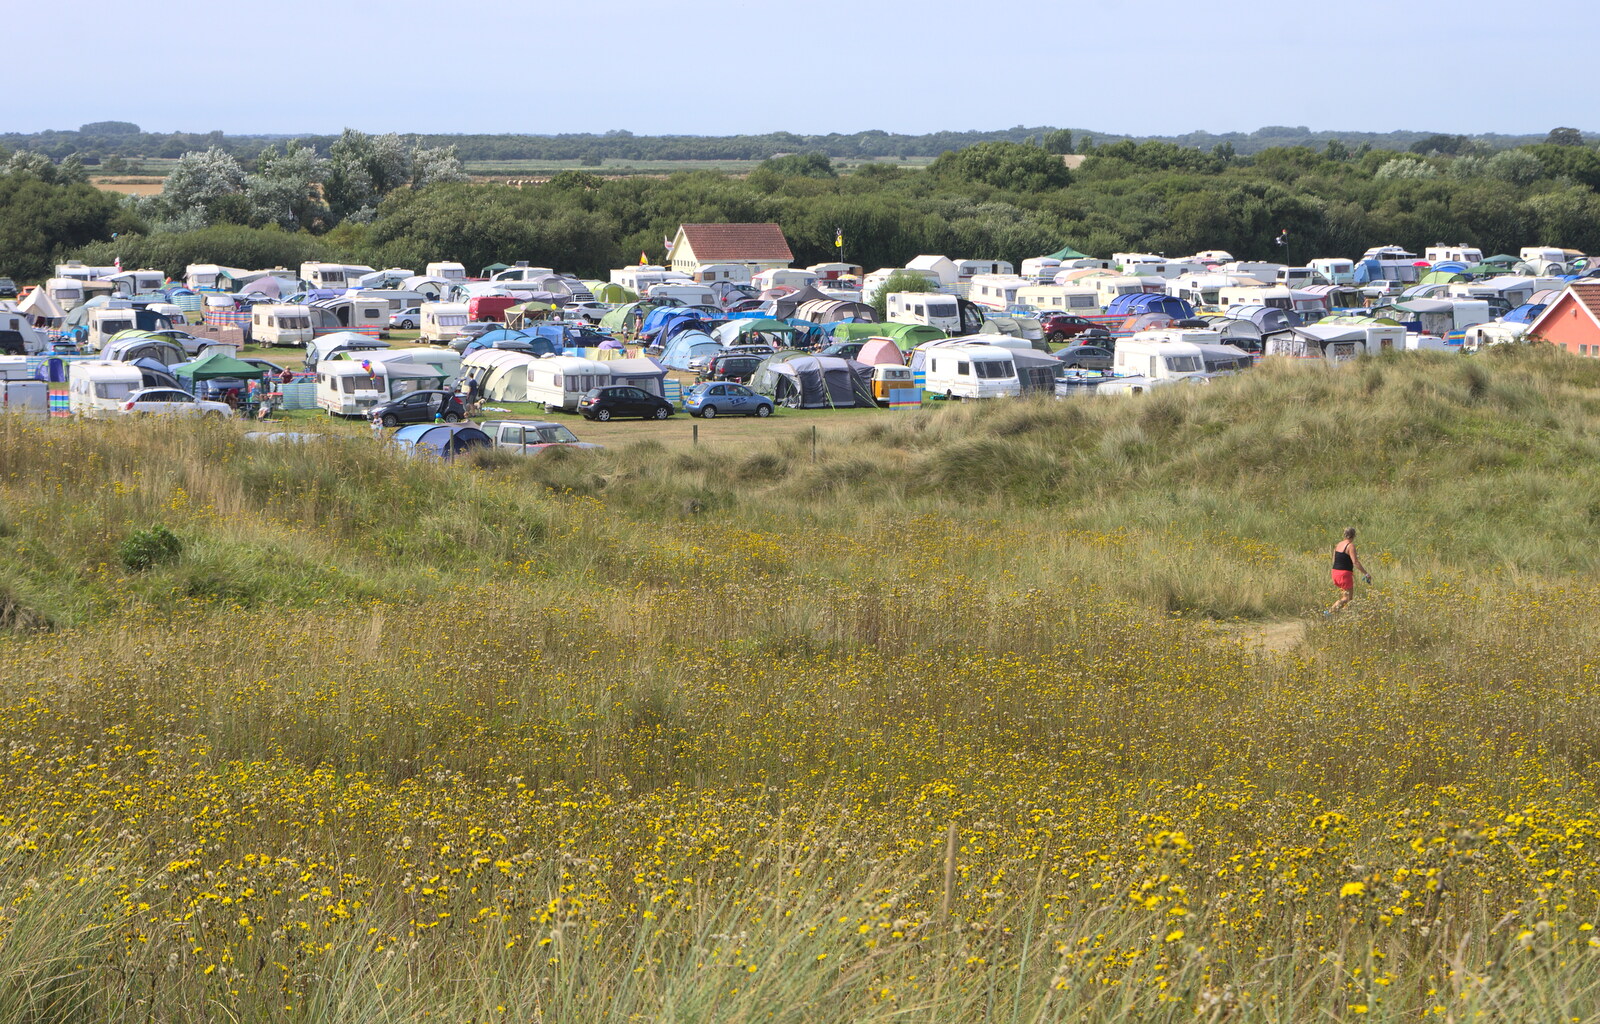 Waxham Sands campsite is absolutely heaving from A Trip to Waxham Sands,  Horsey, Norfolk - 27th August 2016